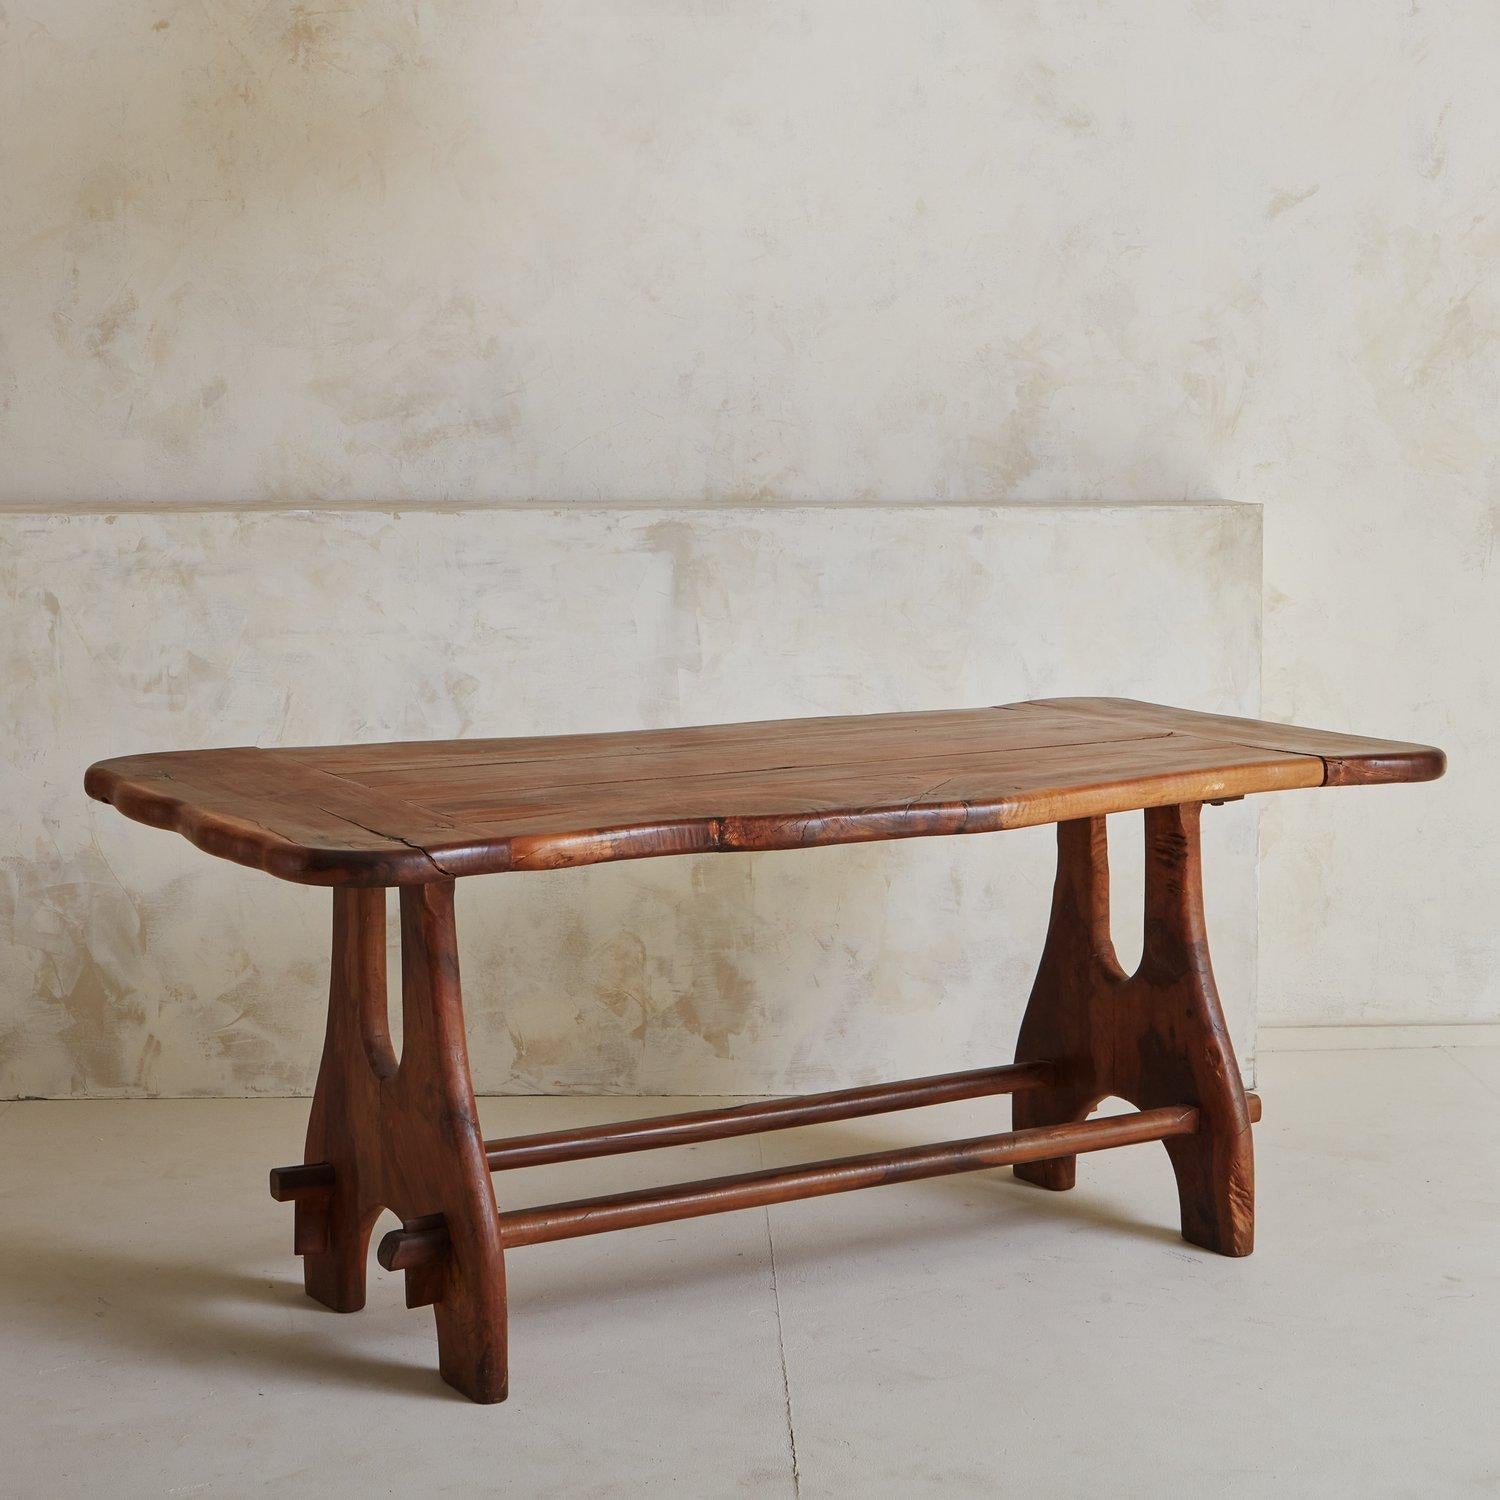 A vintage brutalist French dining table constructed with olive wood. This stunning table features curved legs with decorative cutouts and two stretchers. The tabletop has beautiful curvilinear edges. We love the rich color and graining on this olive